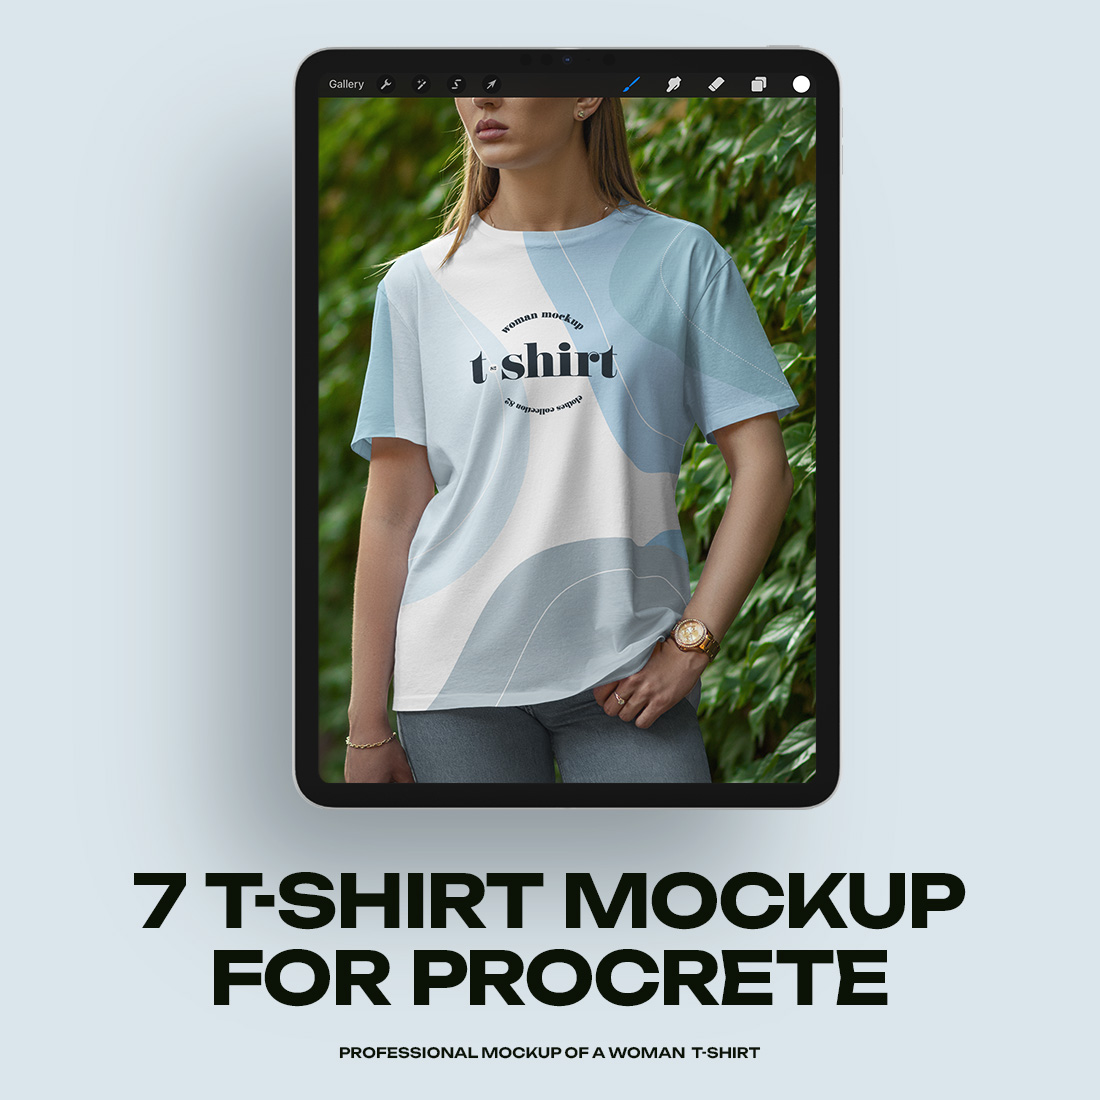 7 Mockups T-Shirt on a Girl Walking in the Green Street for Procreate cover image.